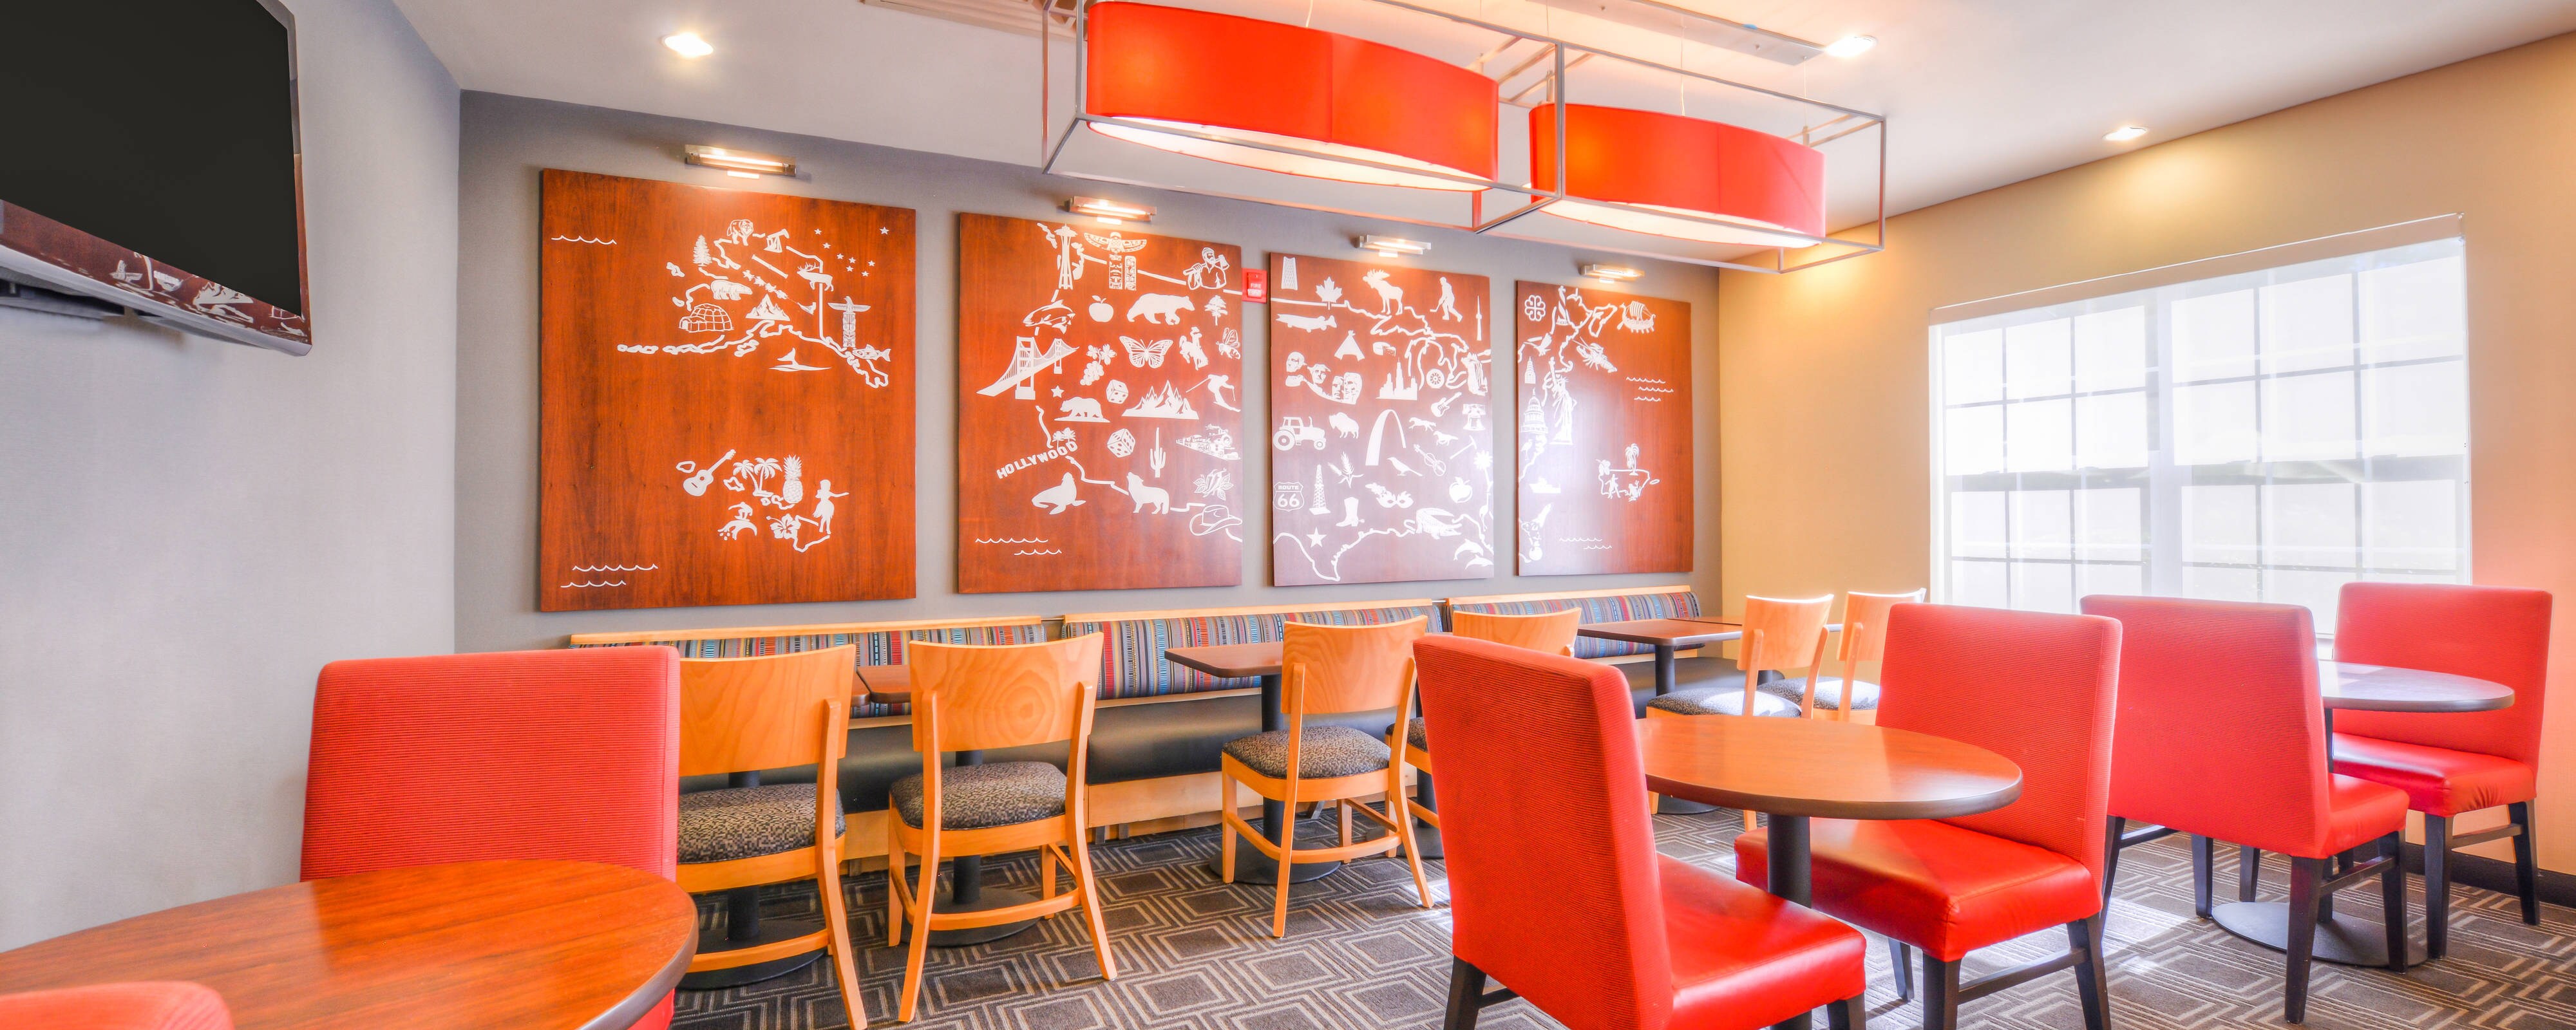 Towneplace Suites By Marriott Arundel Mills Bwi Restaurant